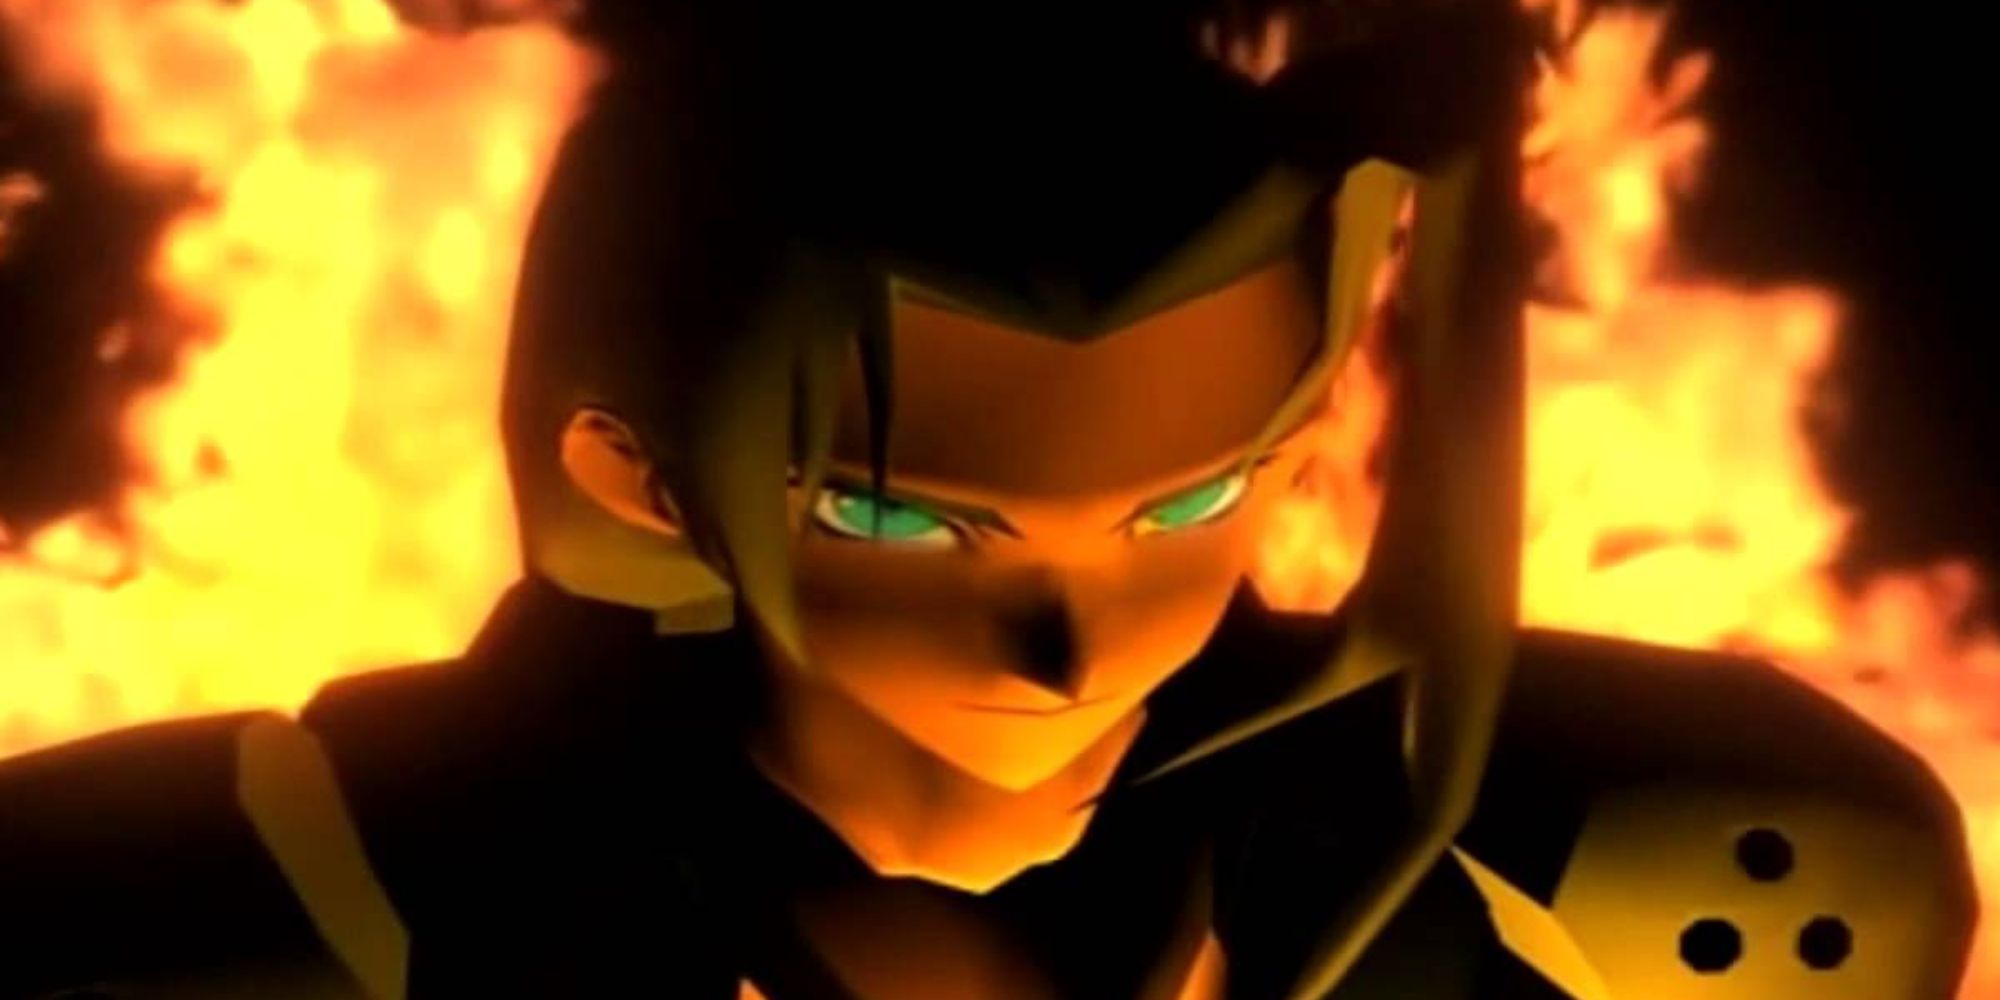 Final Fantasy 7 Screenshot Of Cutscene Where Sephiroth Is Surrounded By Flames